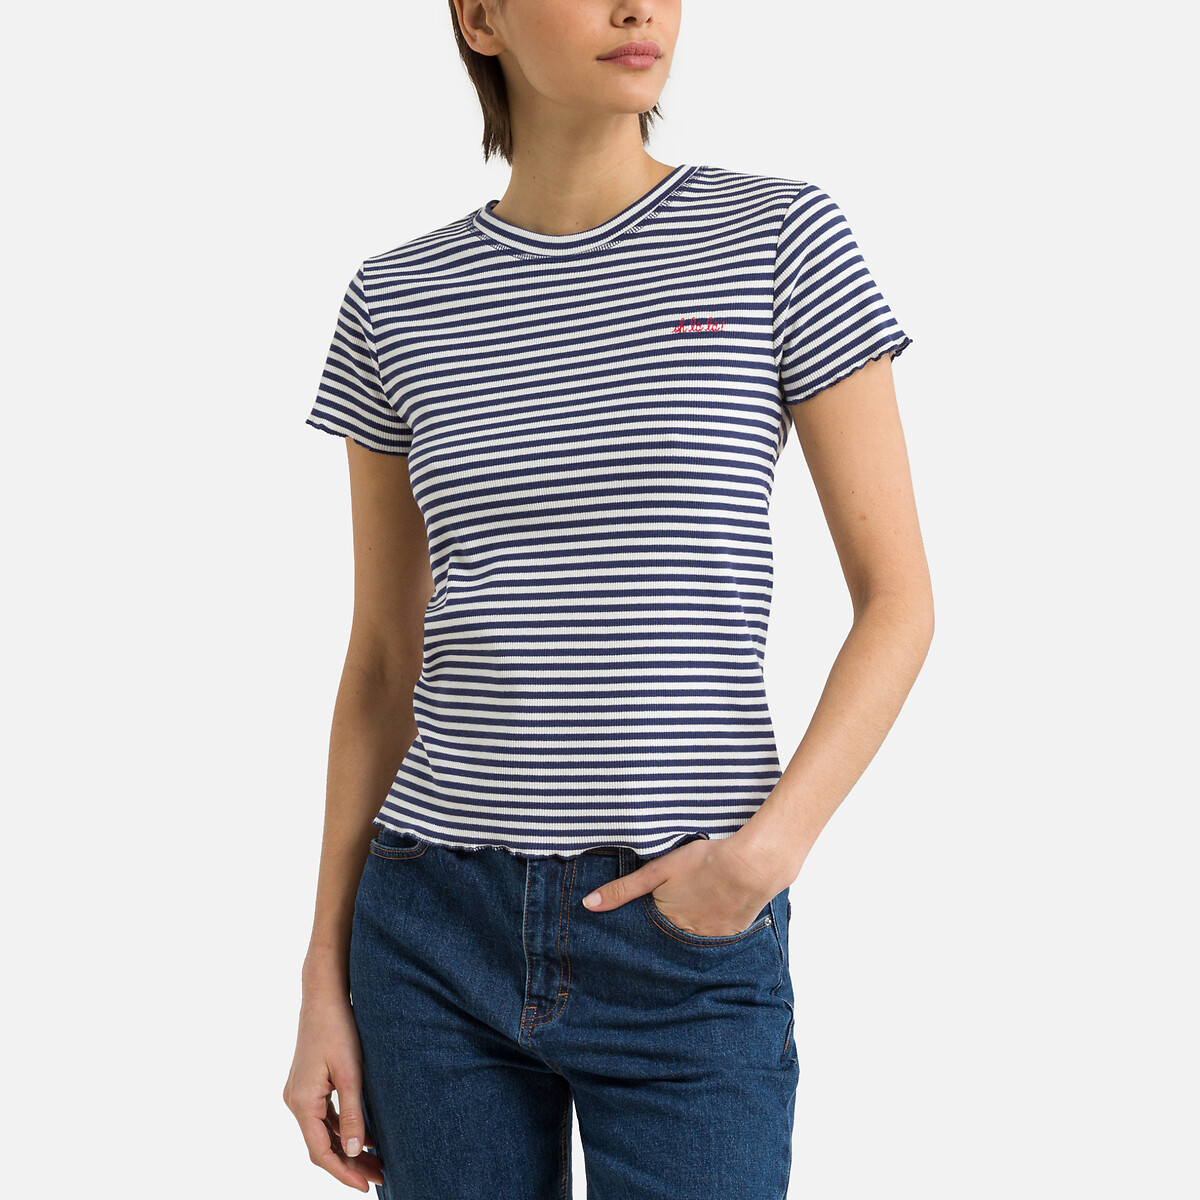 Striped Organic Cotton T-Shirt with Short Sleeves and Crew Neck